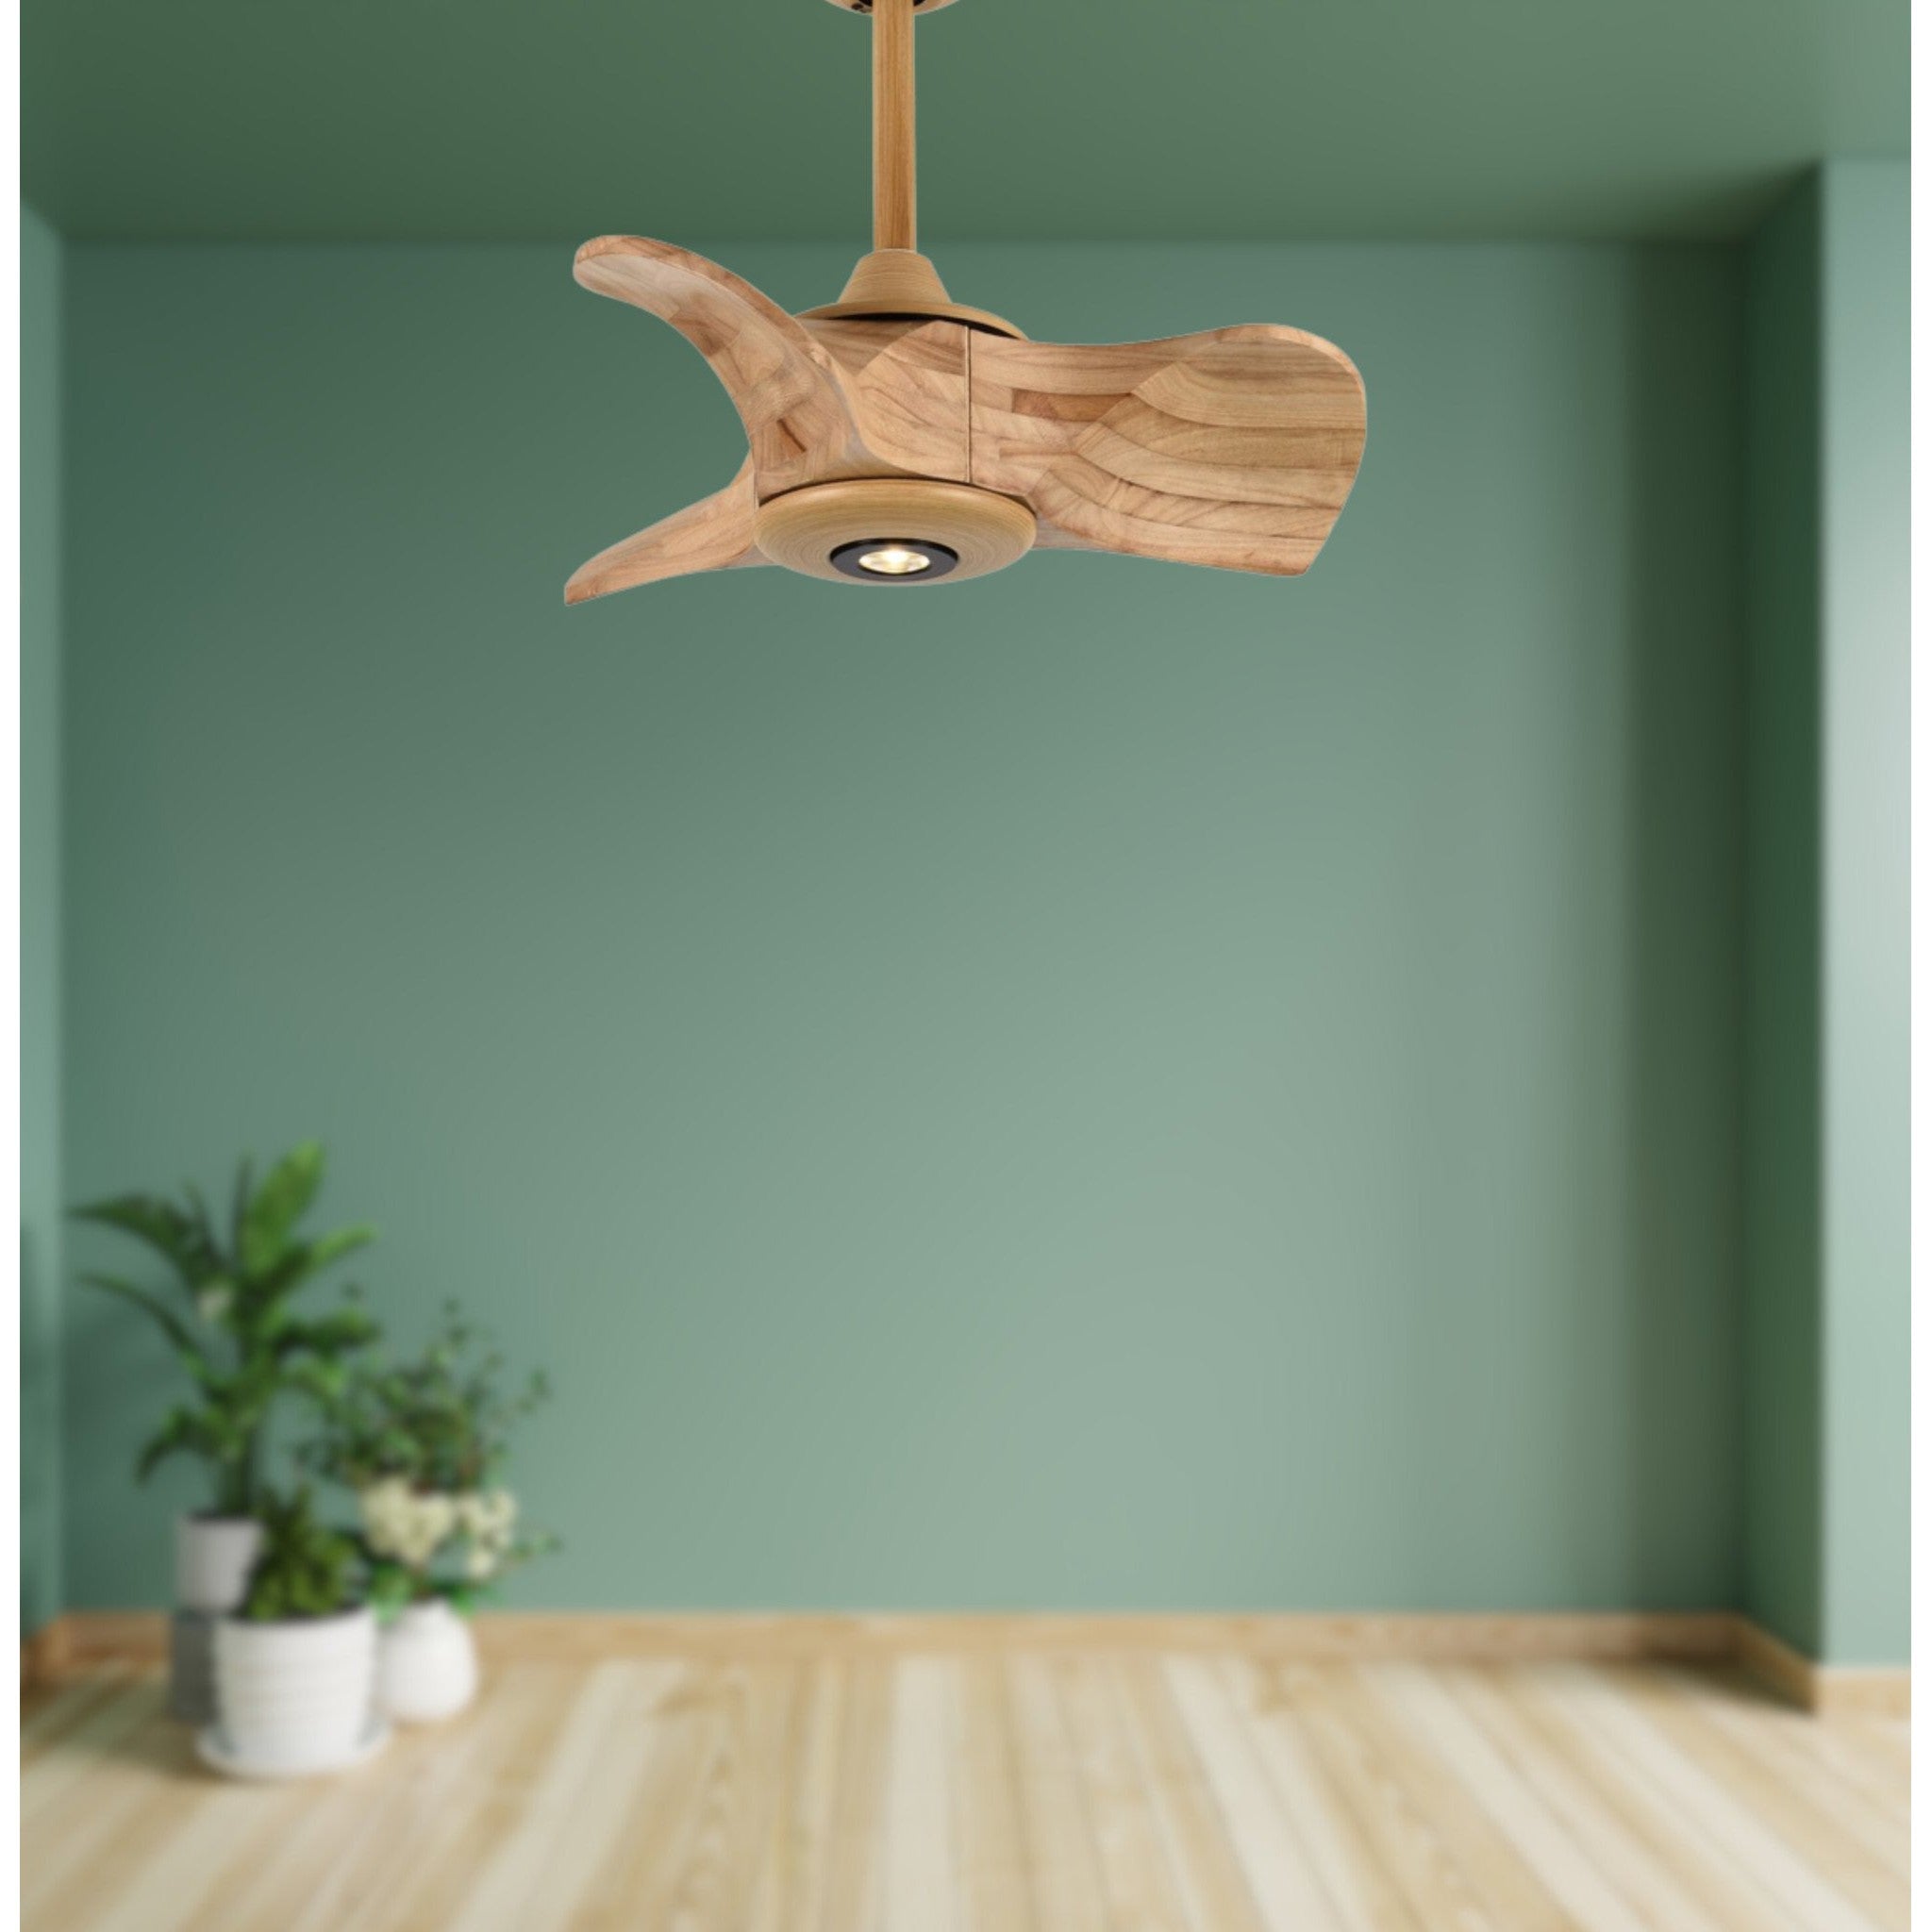 Todays Fans Mini Ceiling Fan 22" with 3 Solid Wood Blades and LED spotlight